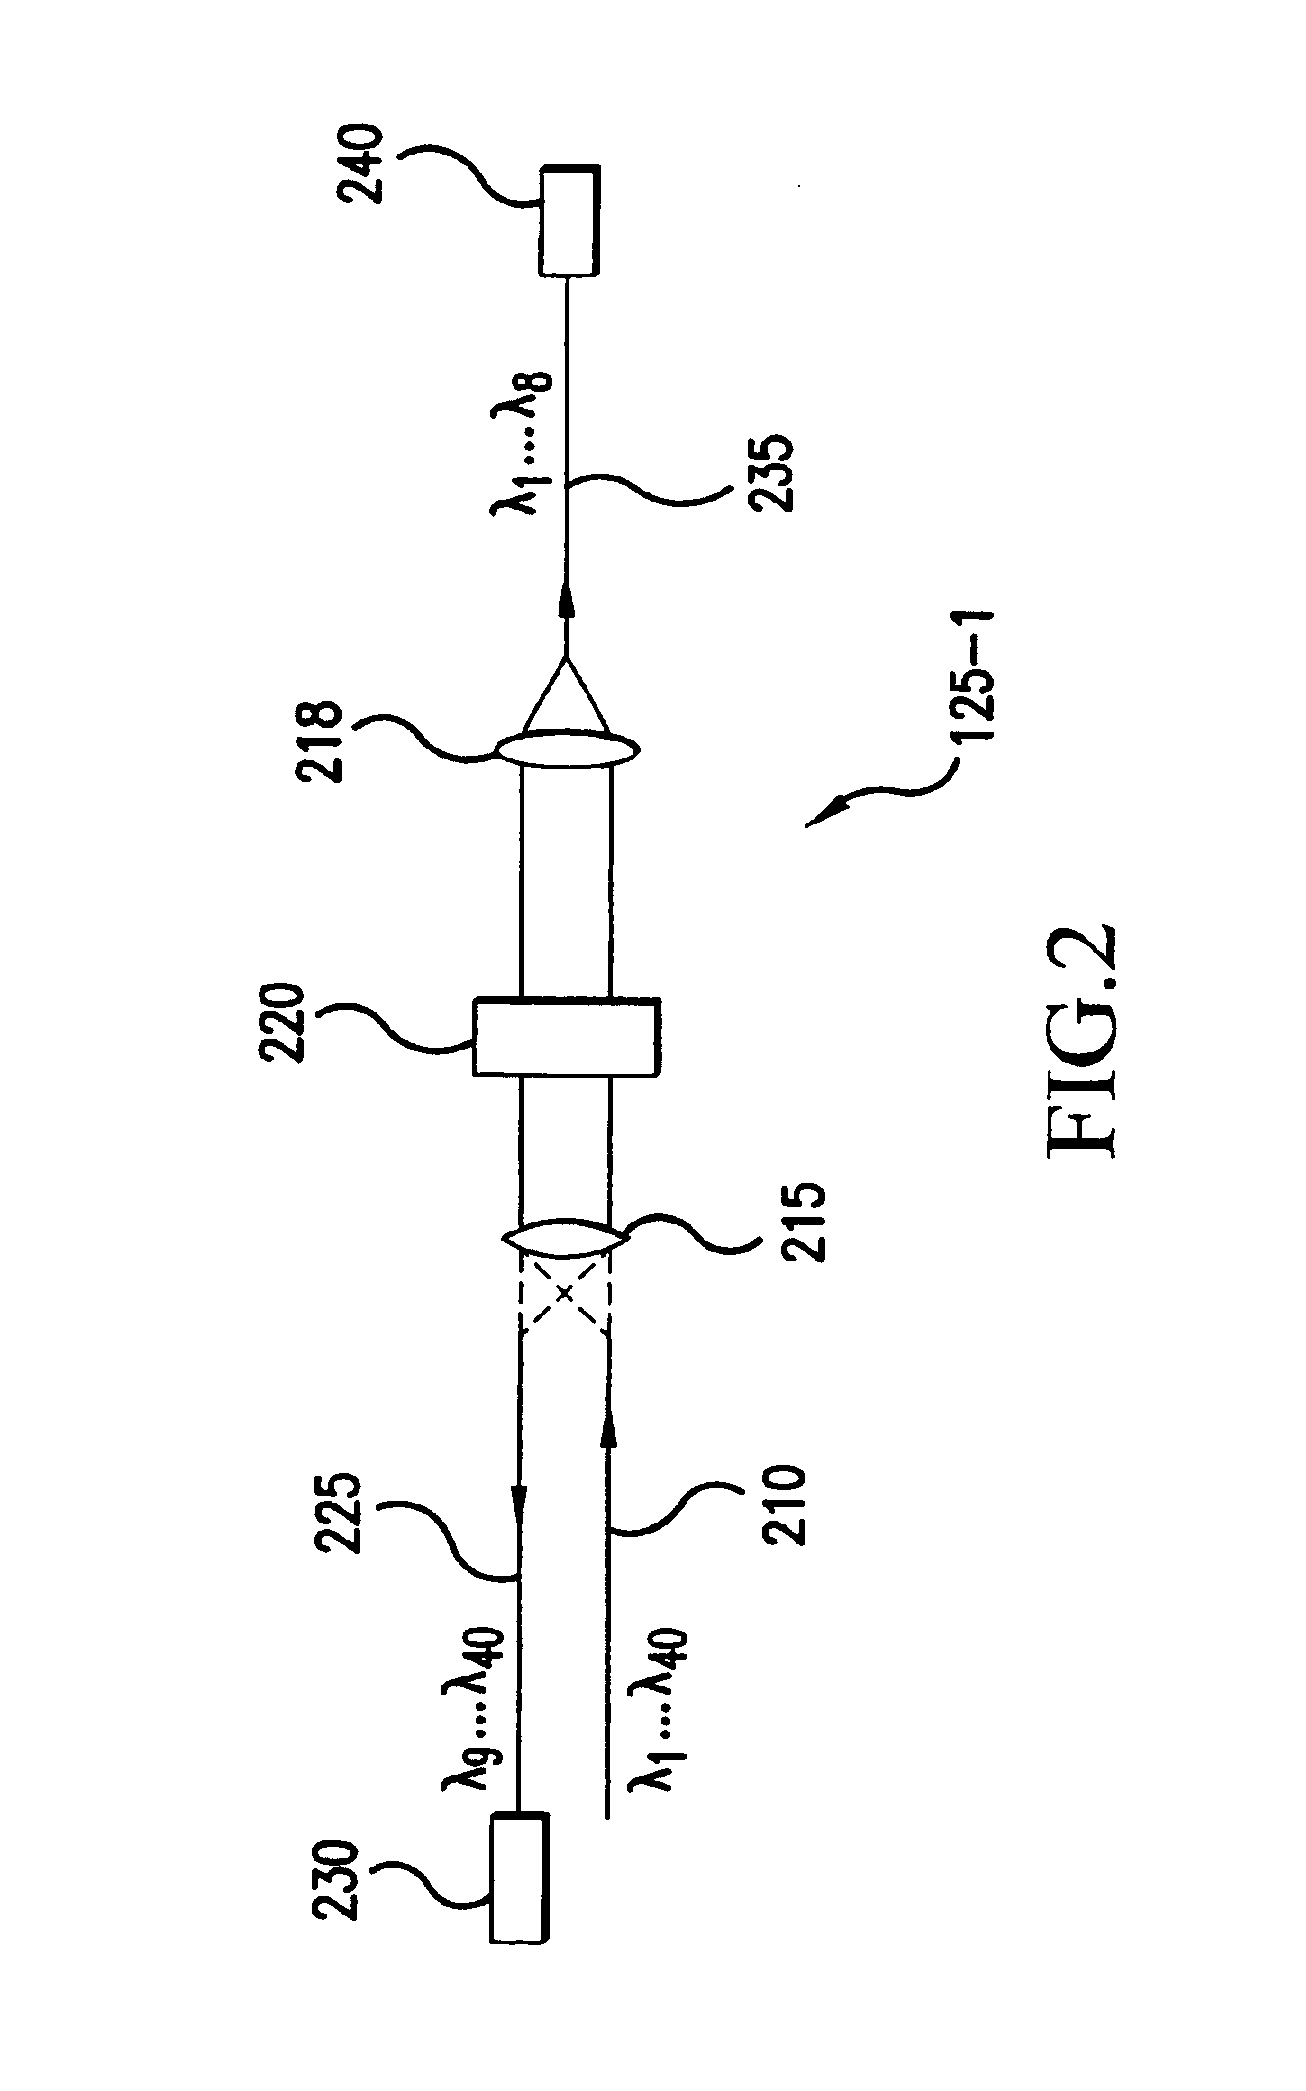 Optical device including dynamic channel equalization